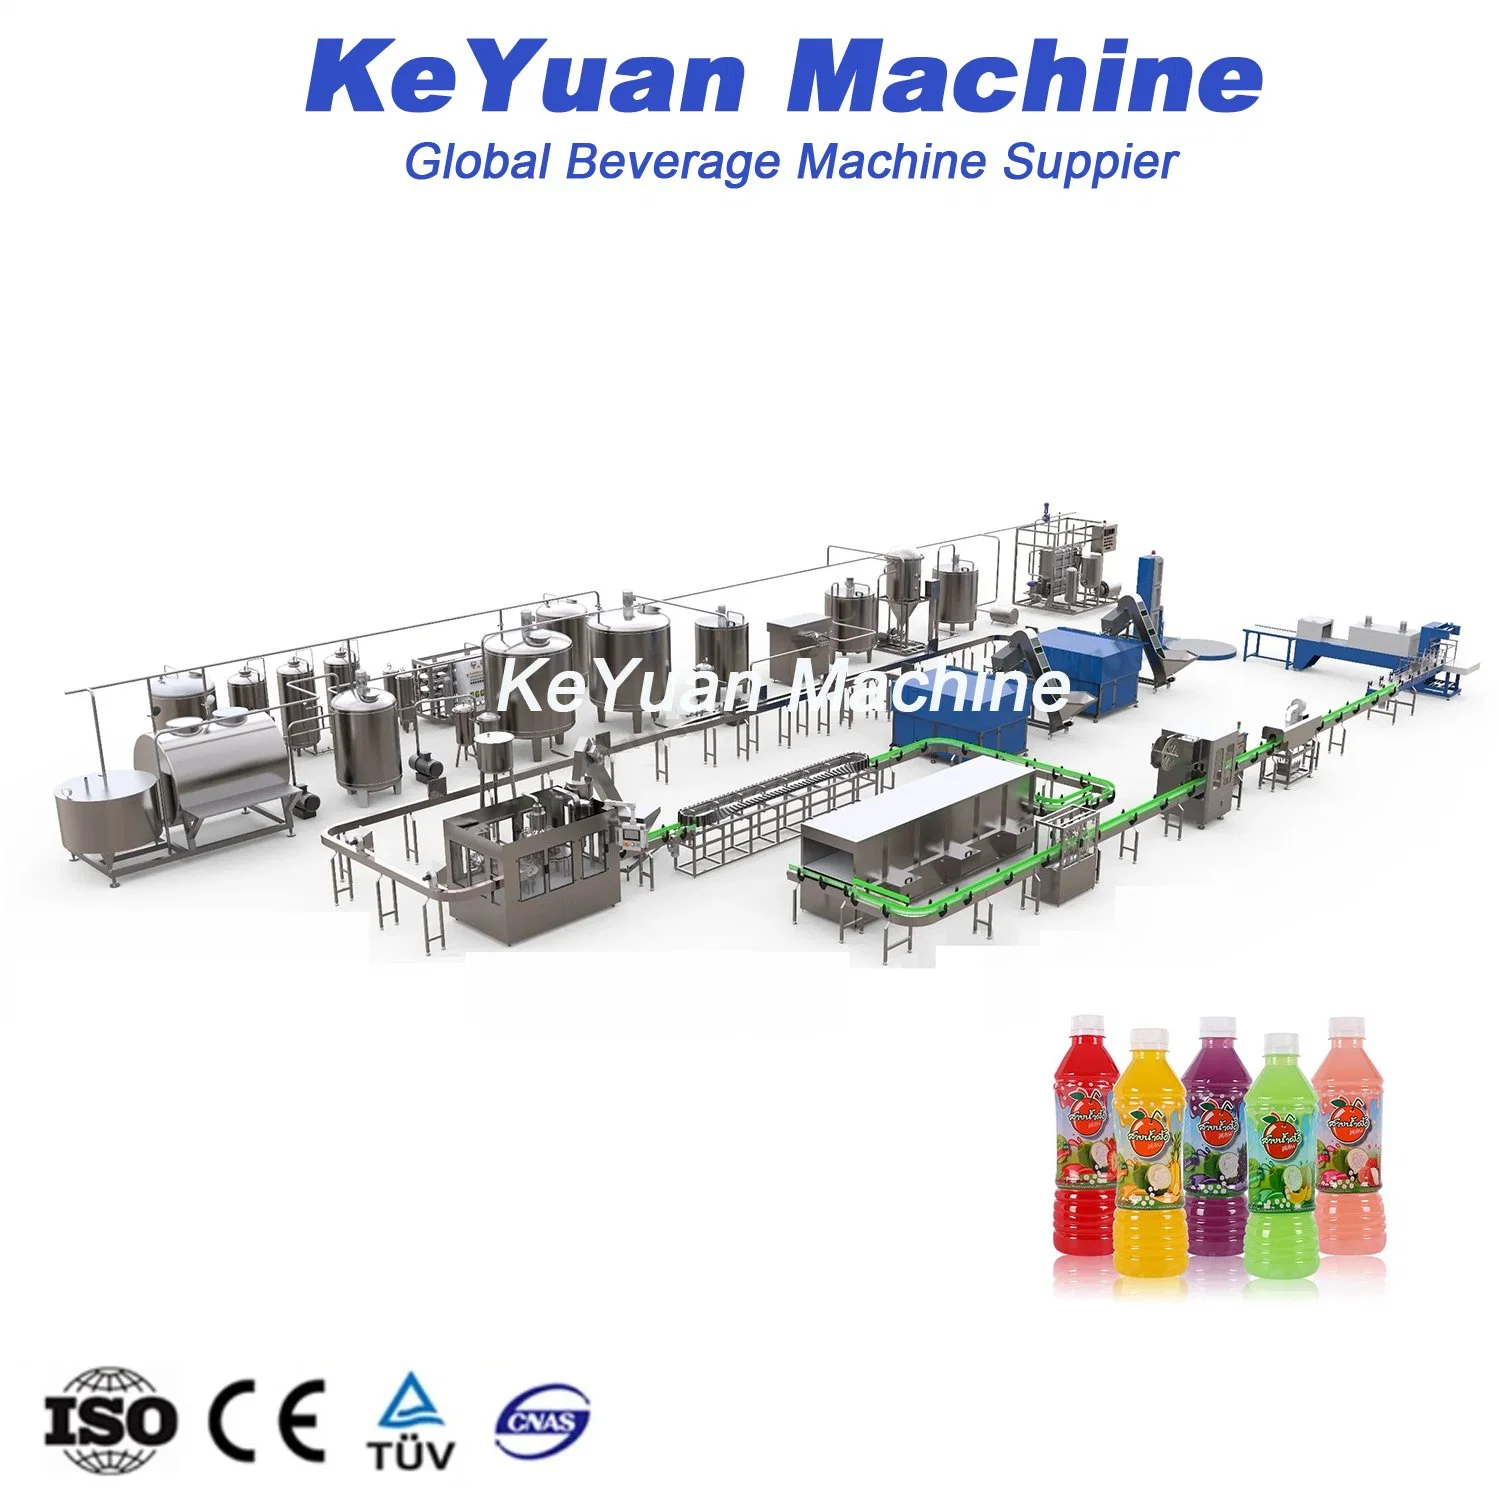 330ml 500ml 1500ml Plastic Glass Pet Bottle Automatic Drinking Mineral Sparkling Pure Water Liquid Alcohol Wine Beverage Filling Making Bottling Machine